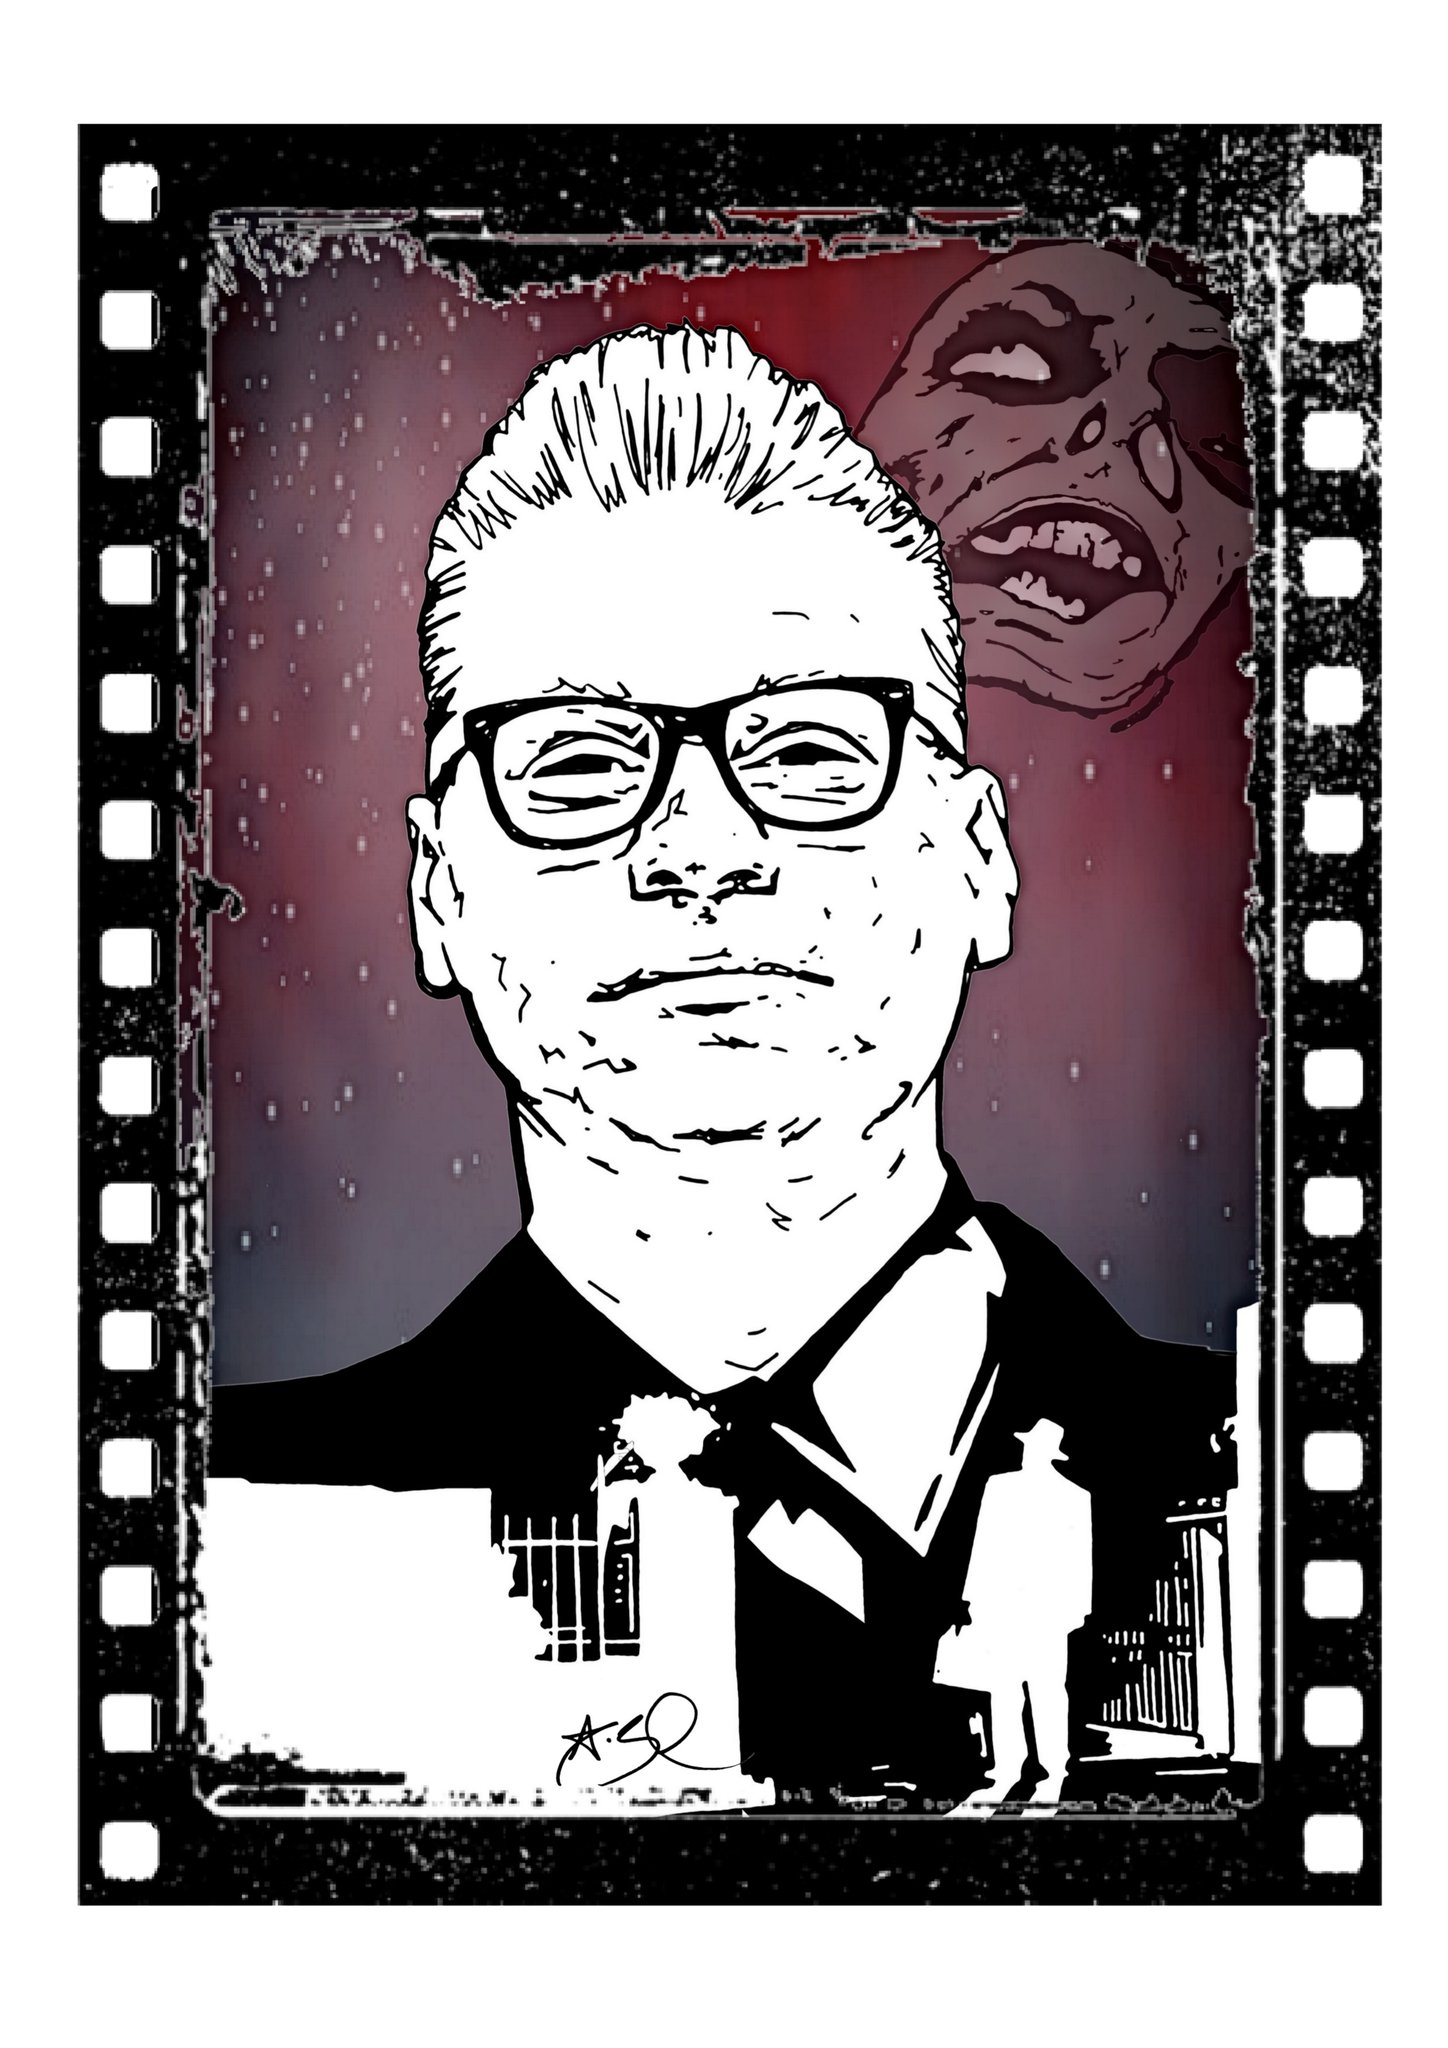 BOTD 1963 - the (other more famous) bequiffed and bespectacled kino king!
Happy Birthday Mark Kermode! 